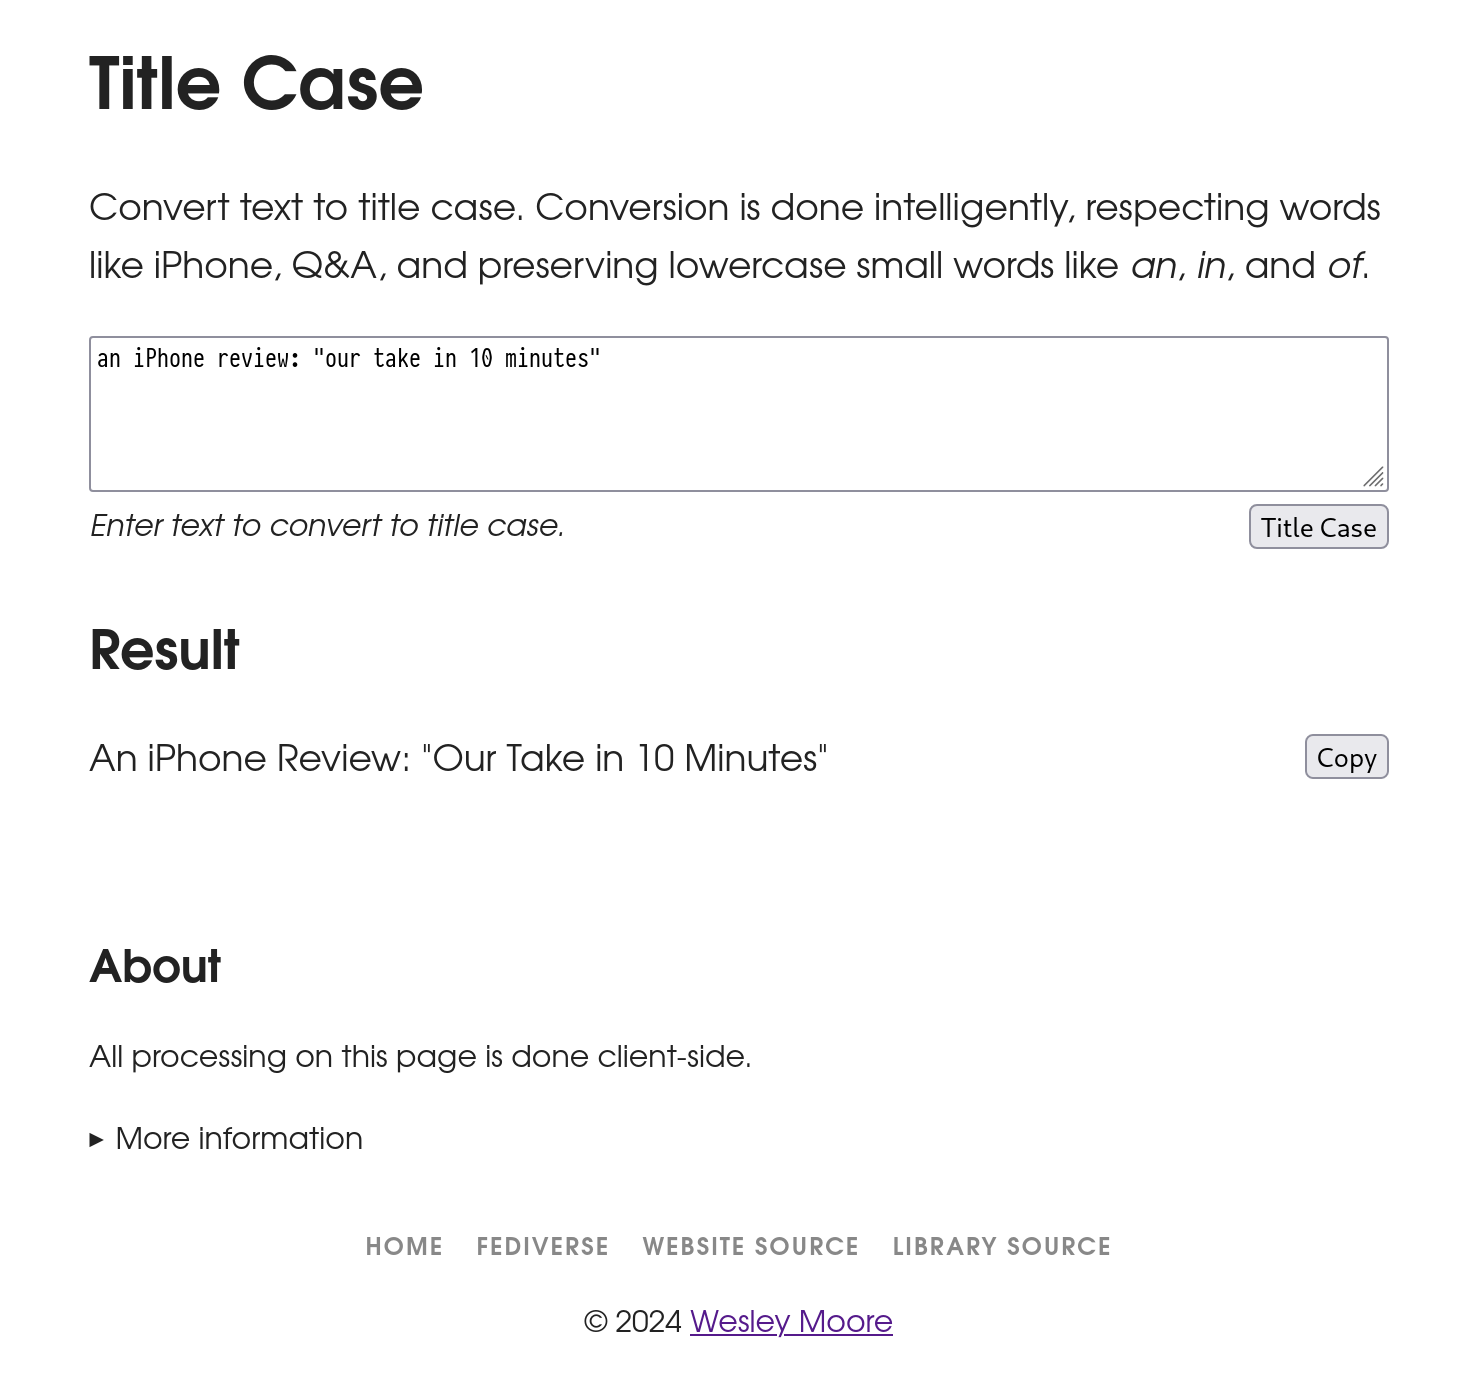 Screenshot of the Titlecase web page showing the result of converting the text ‘an iPhone review: "our take in 10 minutes"’ to title case with the tool. The resulting text is ‘An iPhone Review: "Our Take in 10 Minutes"’.